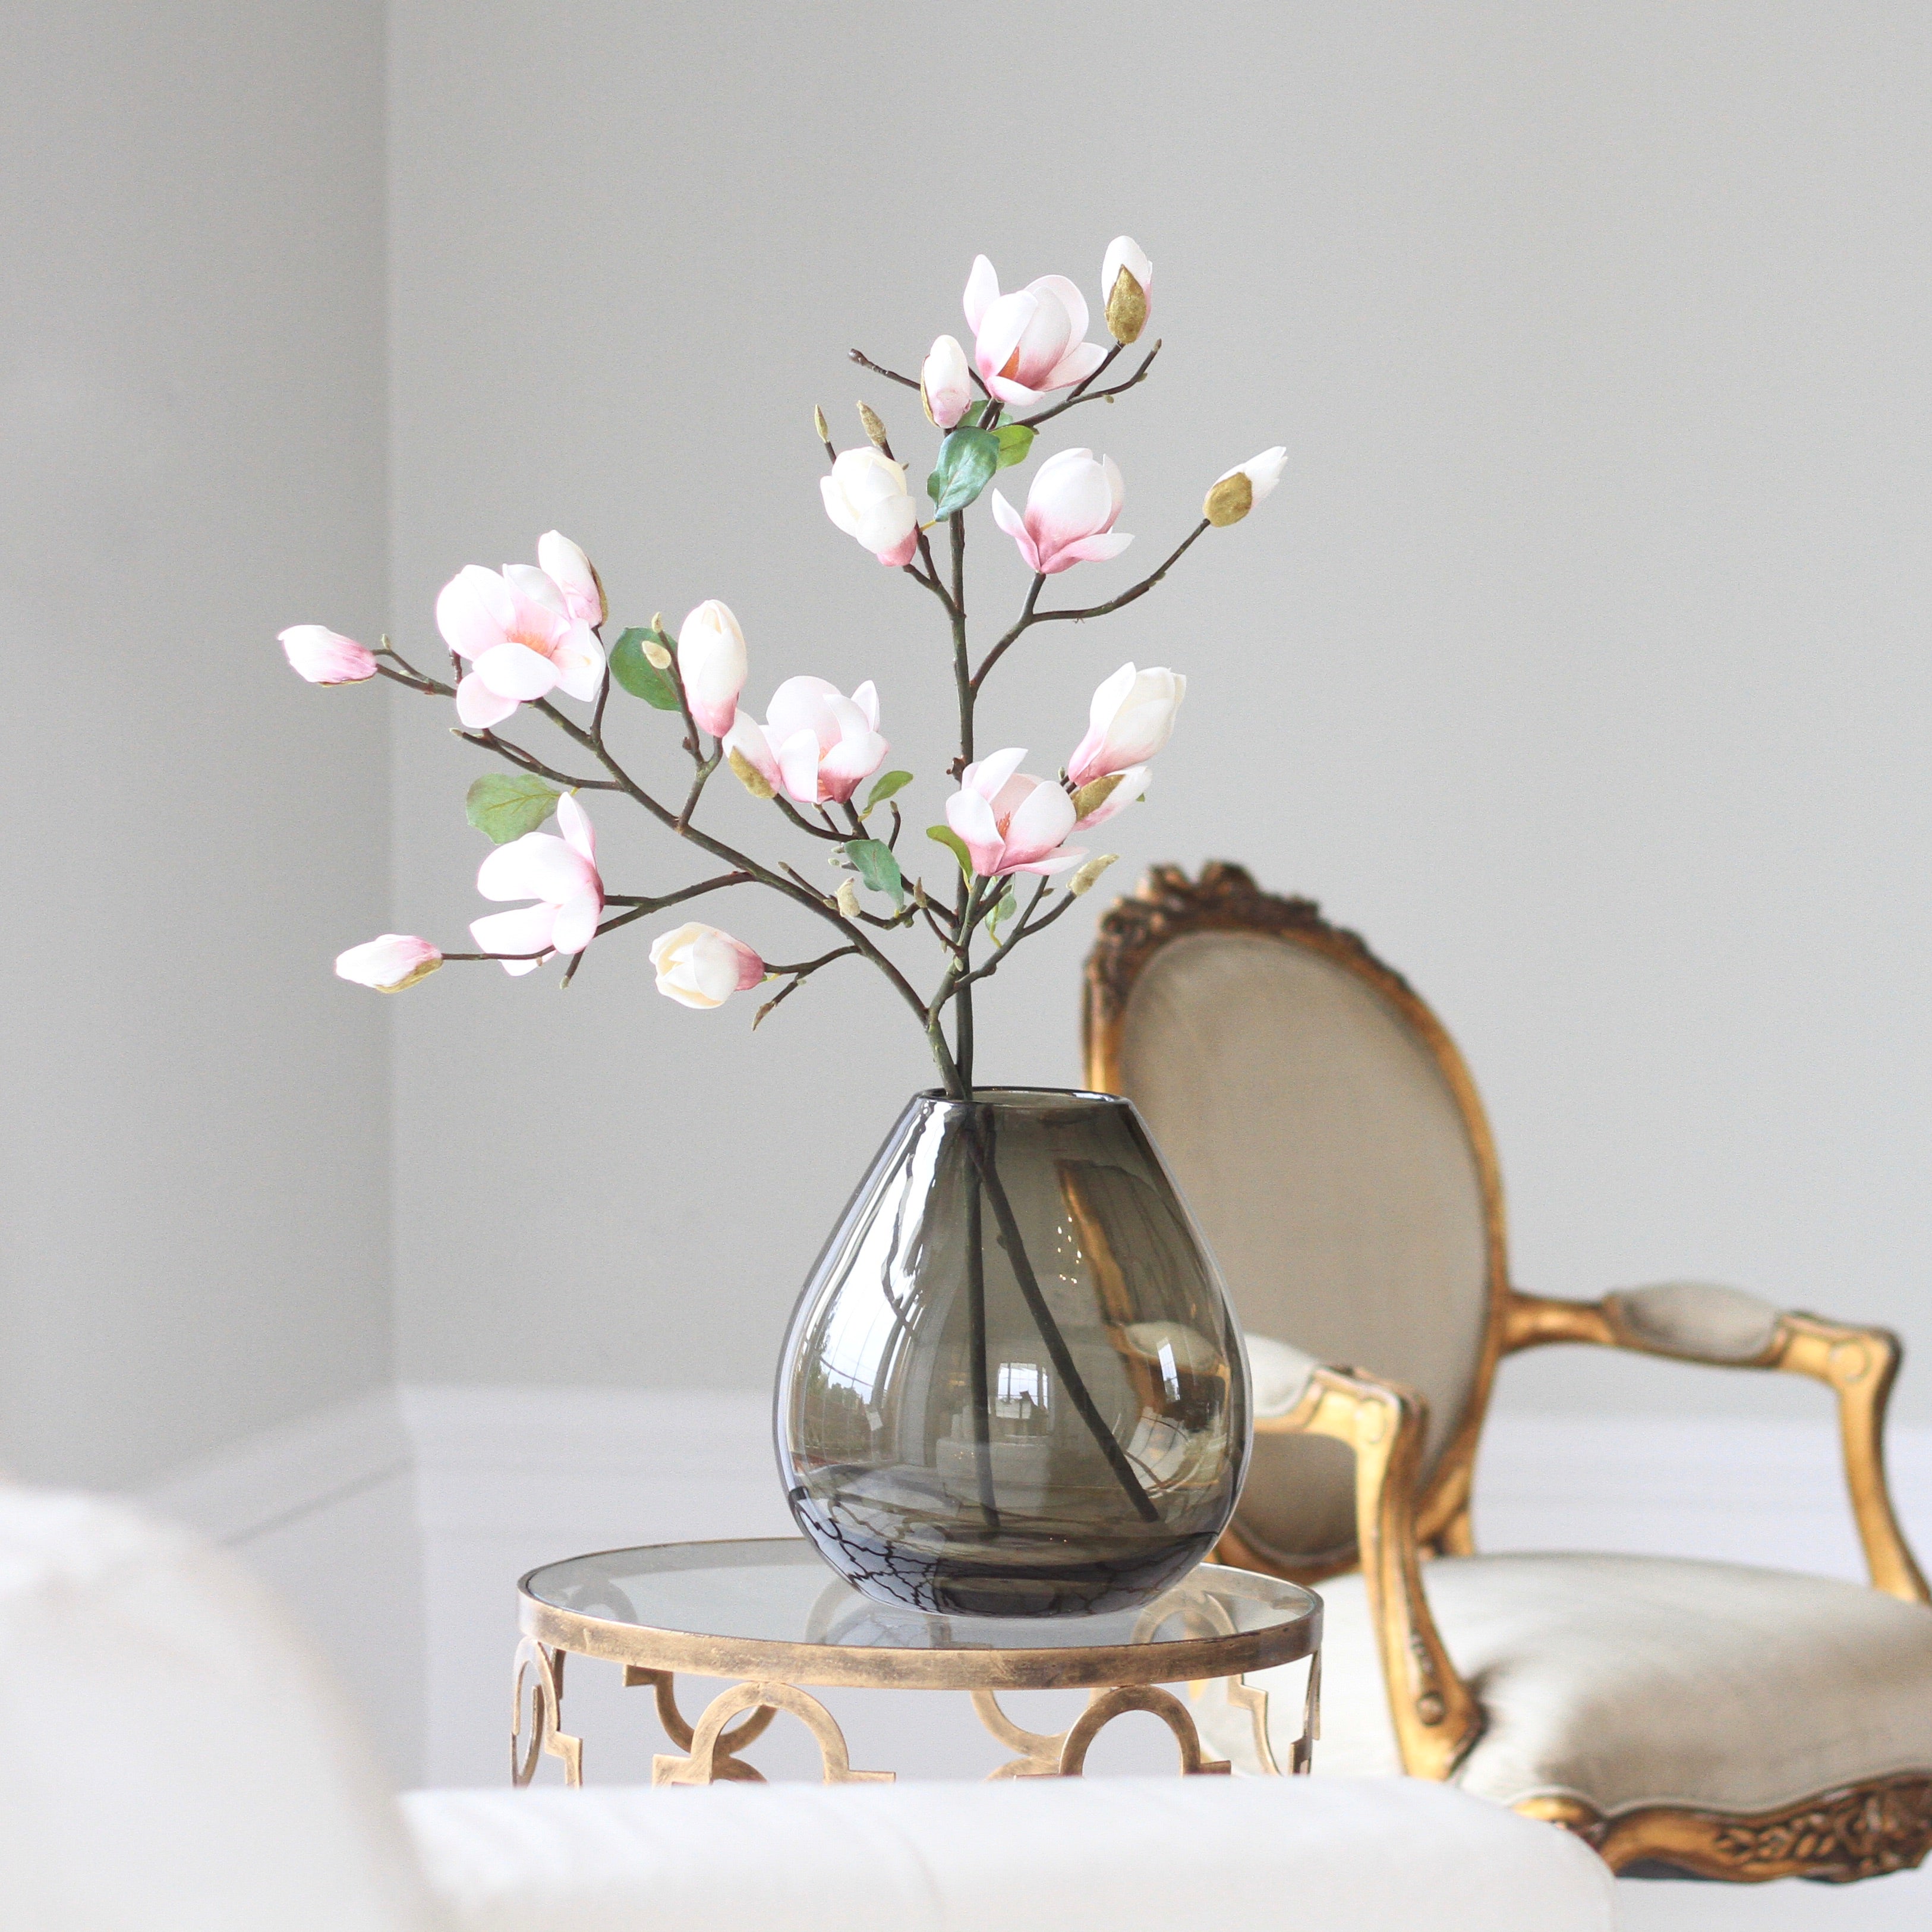 stunningly realistic artificial magnolia stems & branches, faux magnolia flowers that don't look at all fake